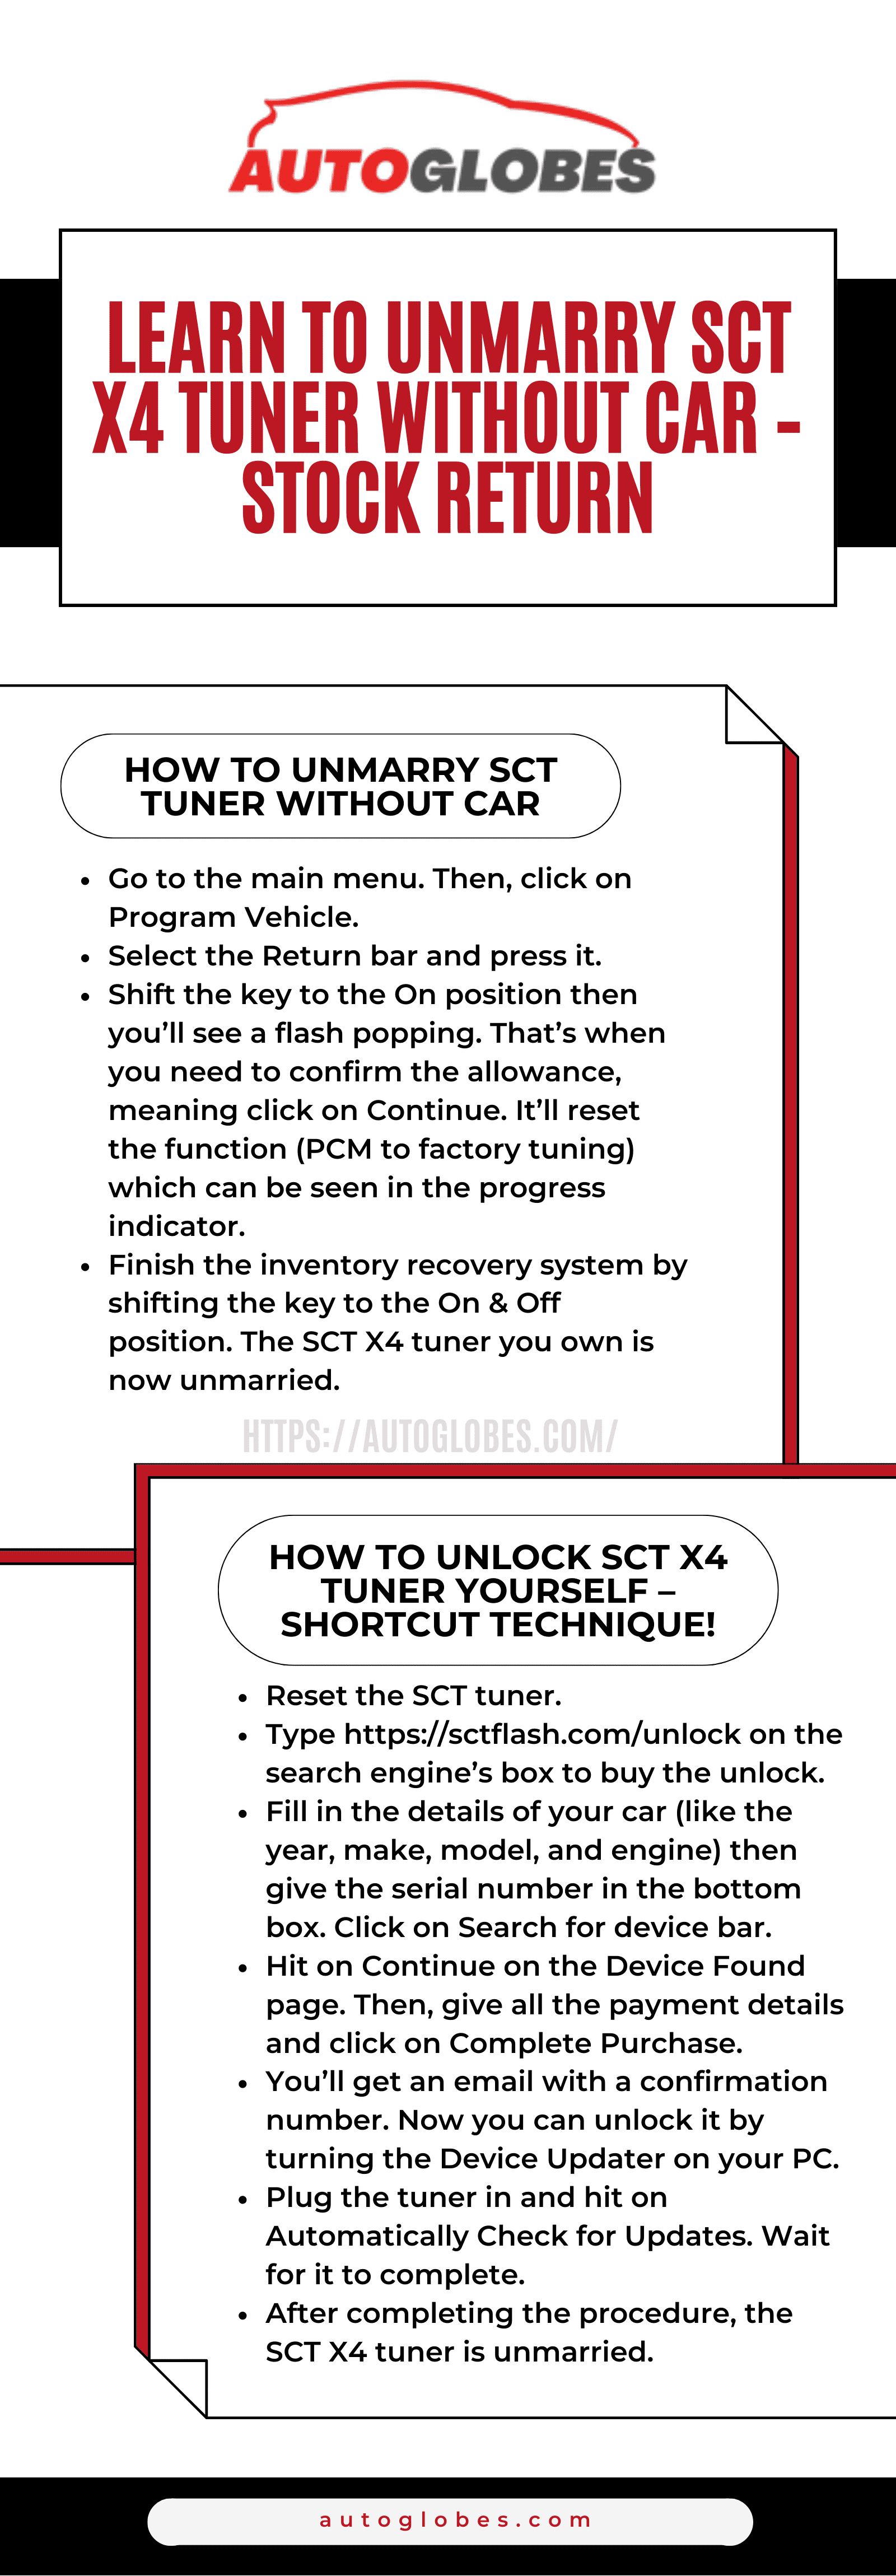 Learn-To-Unmarry-SCT-X4-Tuner-Without-Car Infographic